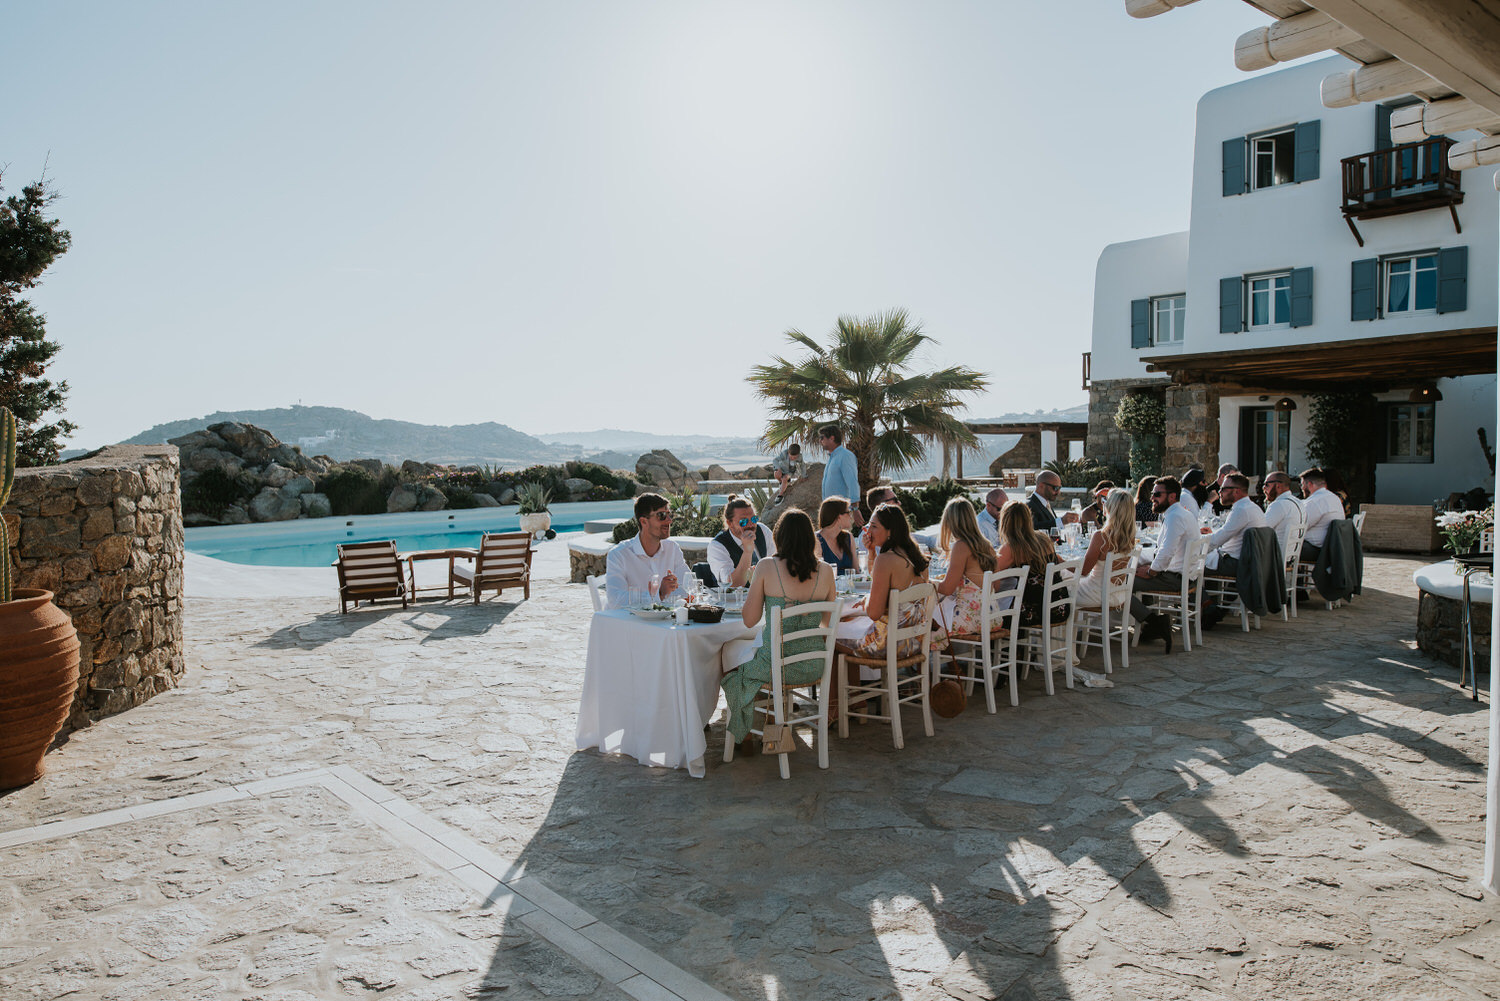 Mykonos wedding photographer: reception terrace and the guests sat at the long table in front of the villa in the afternoon light with palm tree in the background.